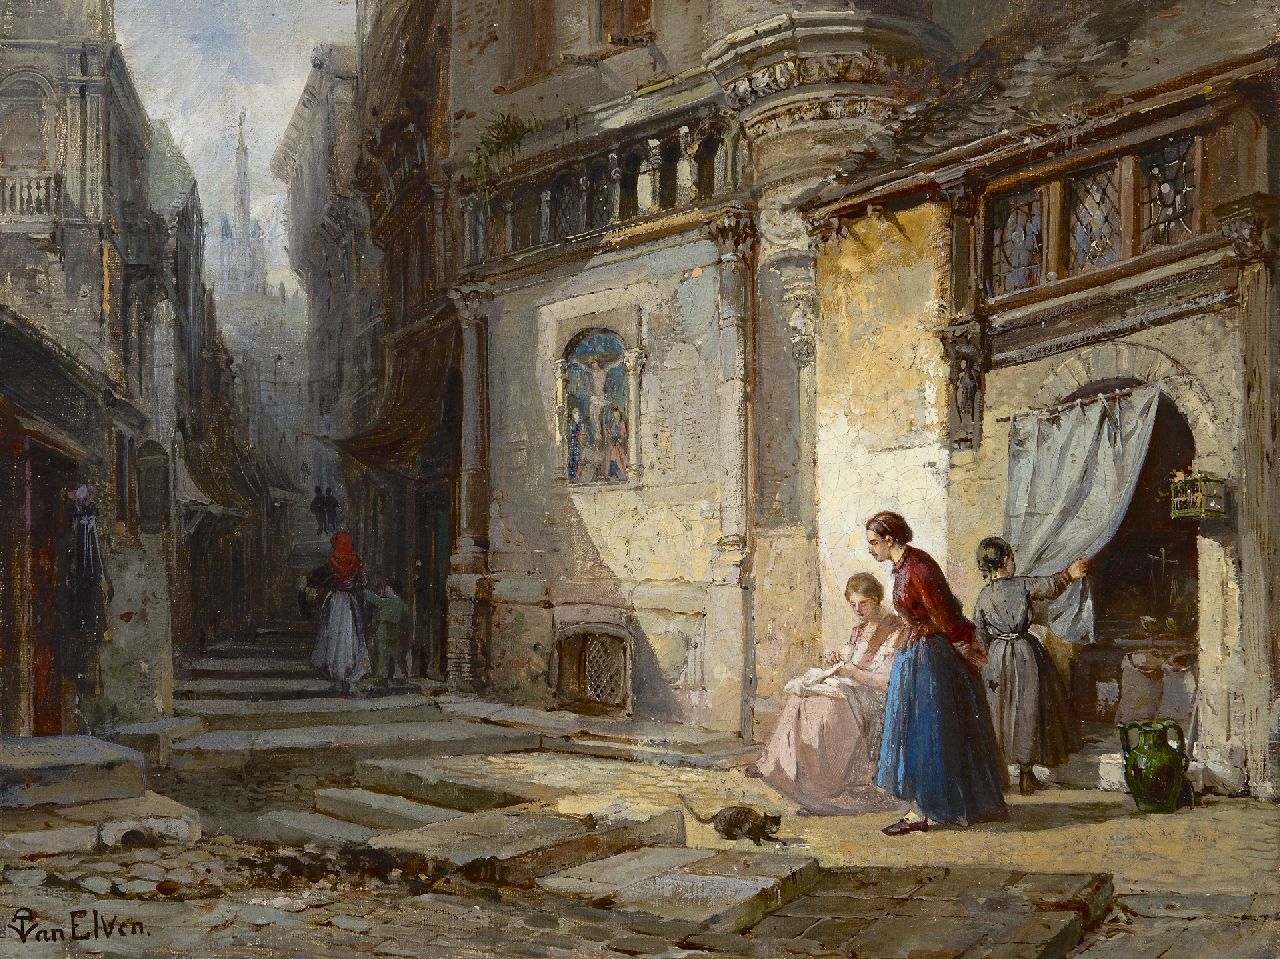 Pierre Tetar van Elven | A view into an old town (Antwerp?), oil on canvas, 24.6 x 32.5 cm, signed l.l.